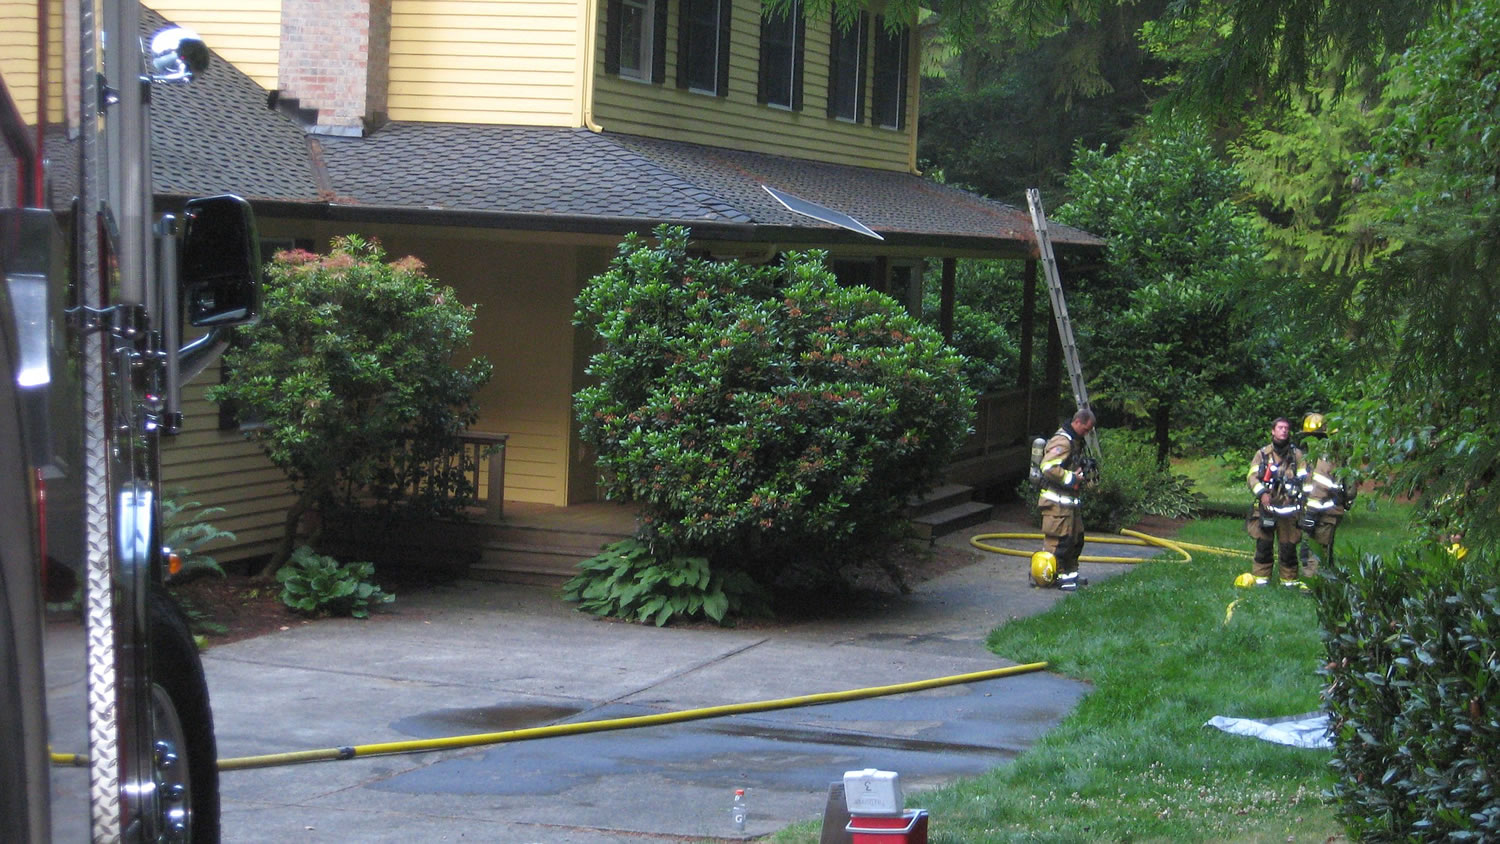 Fire officials said a Hockinson house was damaged in an early morning fire that started in an HVAC system.